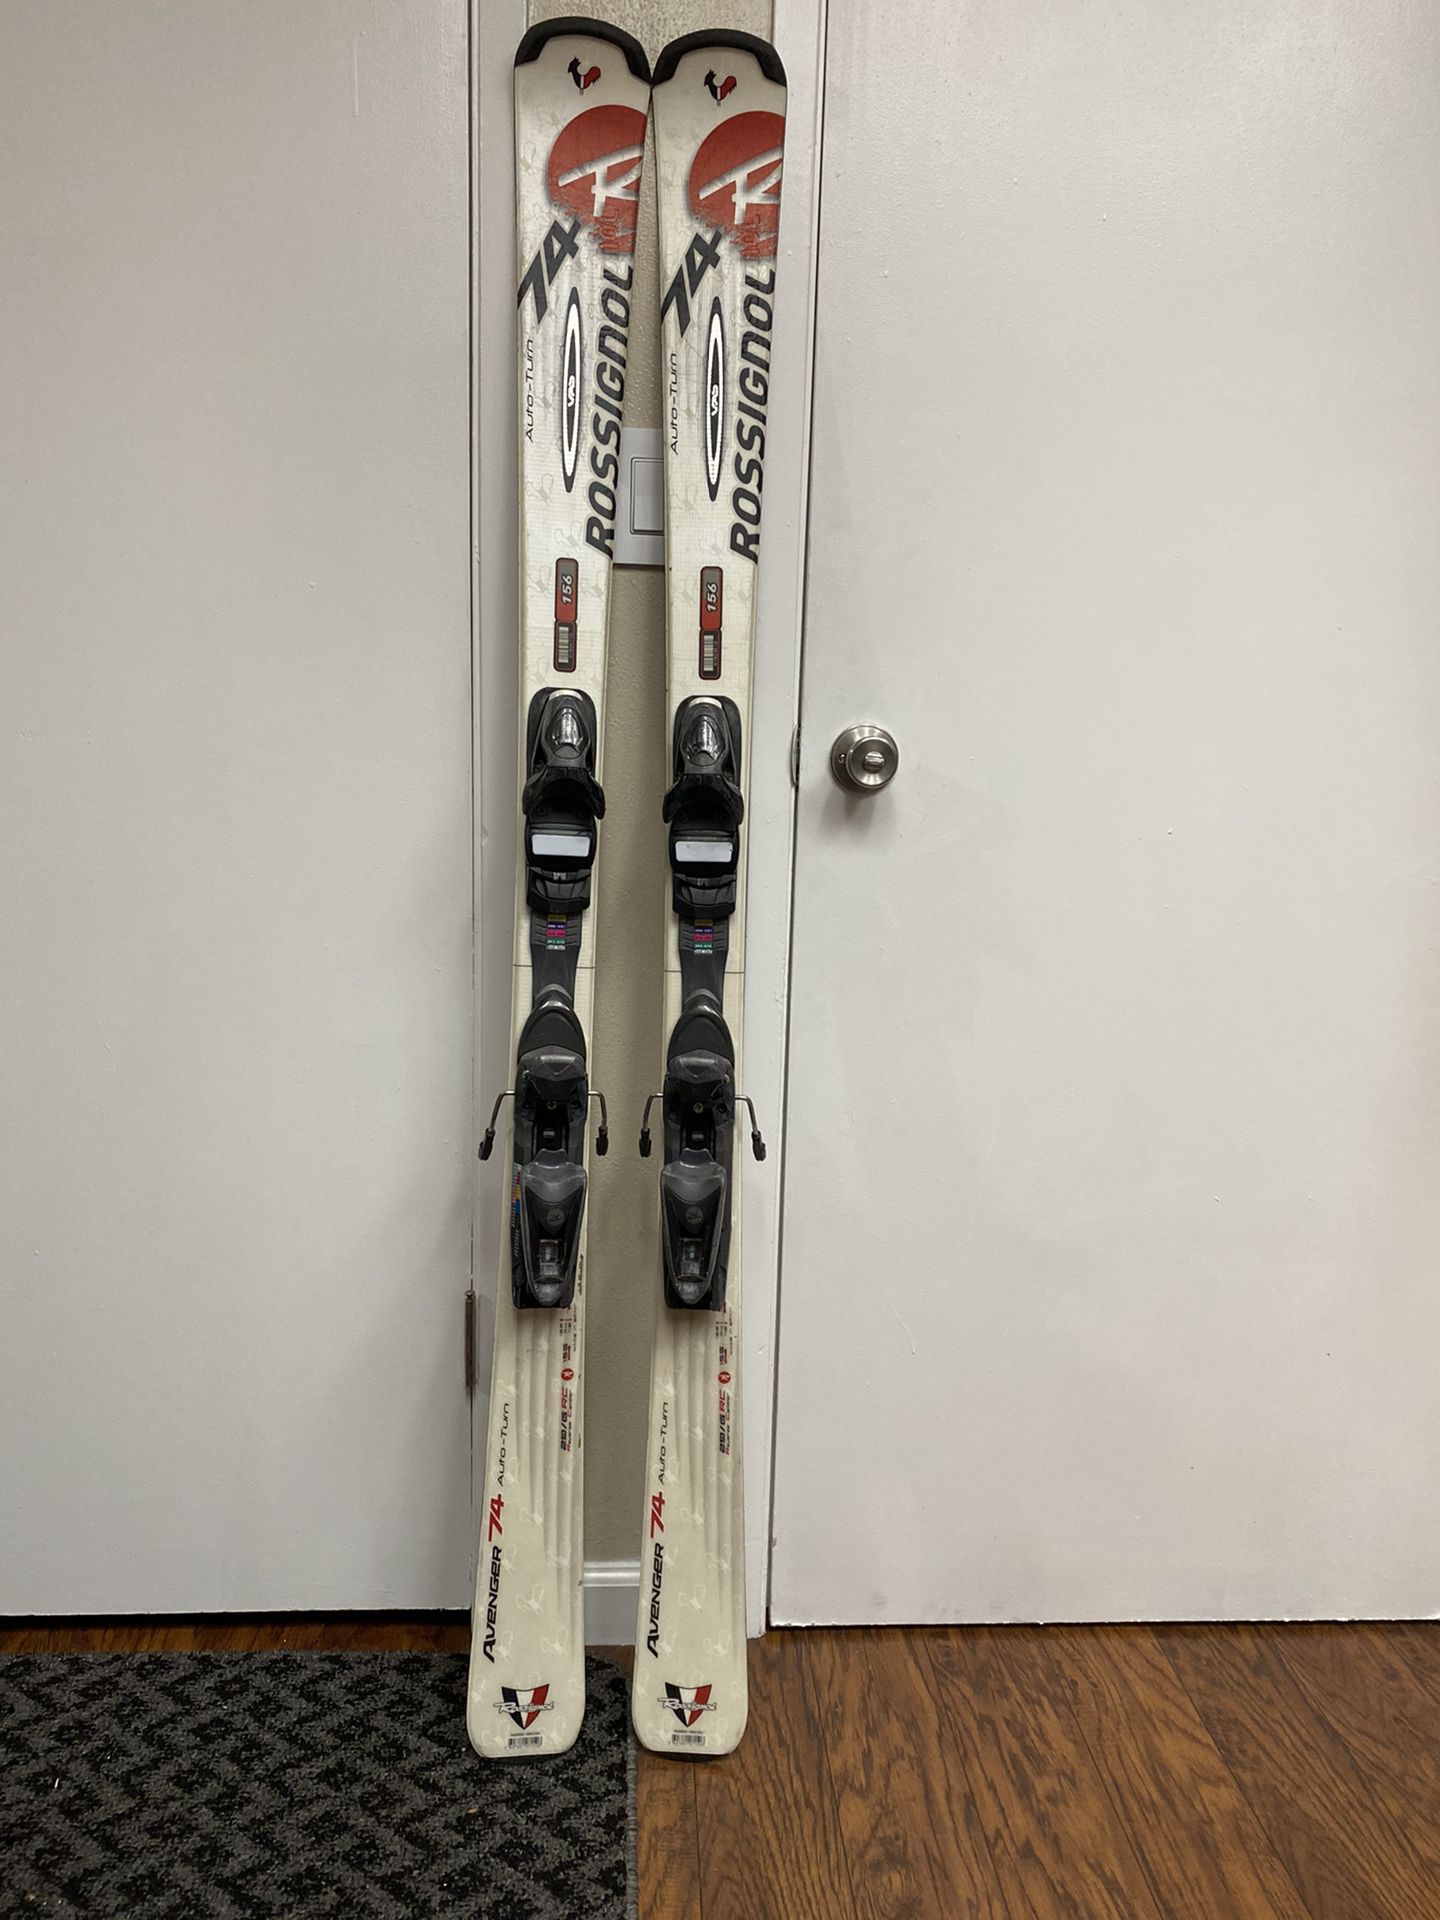 156cm Rossignal 74 auto turn skis professionally hand sharpened and waxed